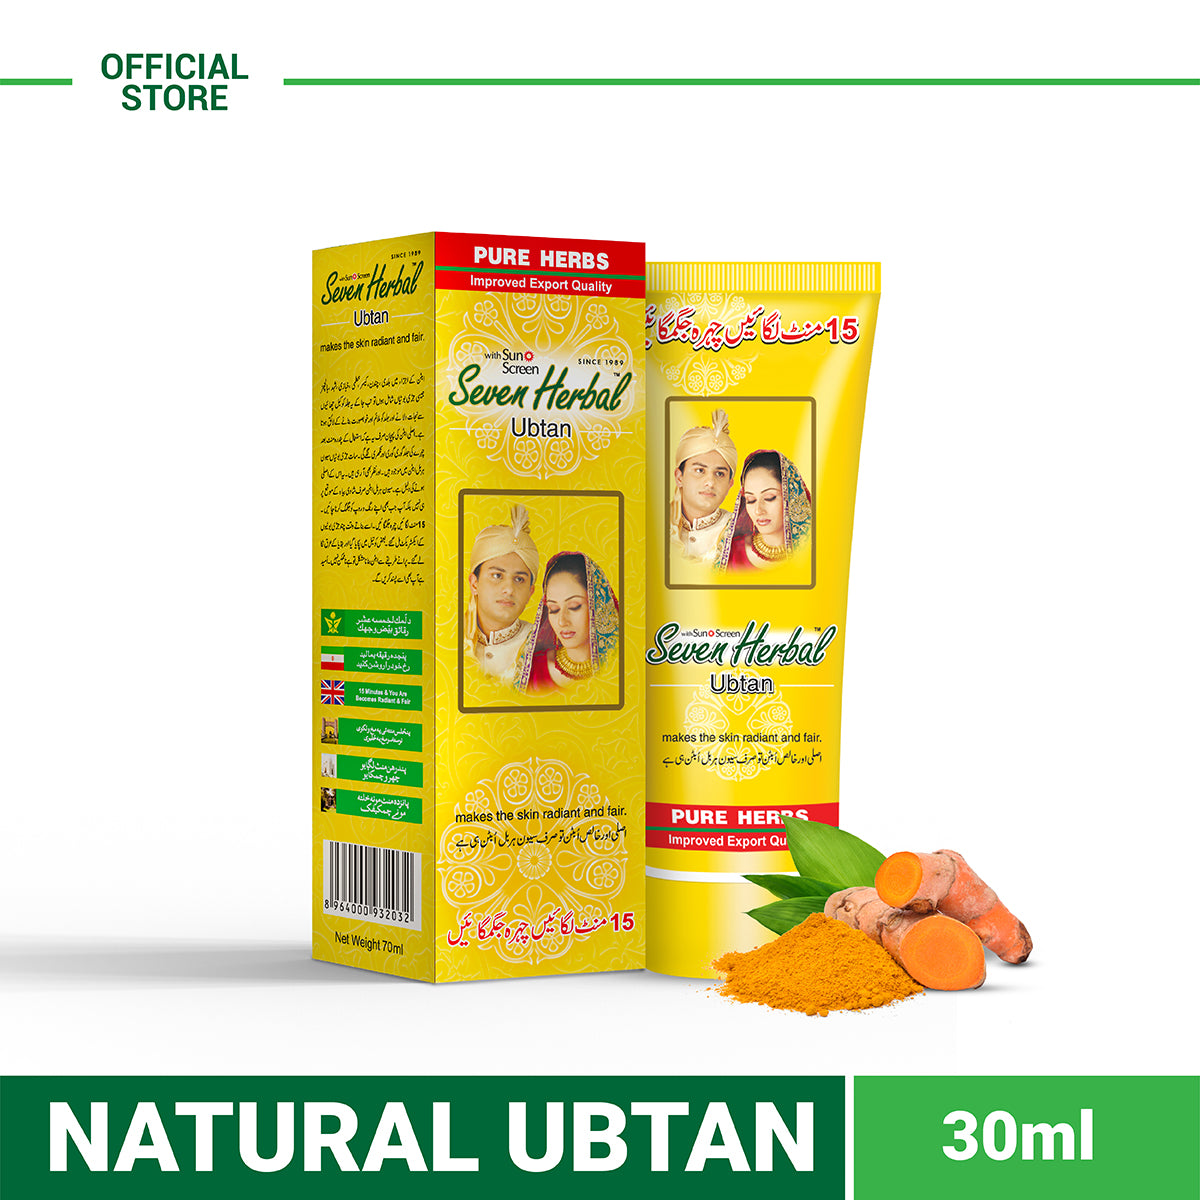 Seven Herbal ubtan is a blend of natural ingredients like Sandalwood, Honey, Turmeric, valerian herb, saffron, and Mallow extracts. All these ingredients are highly beneficial for improving skin texture and skin tone.